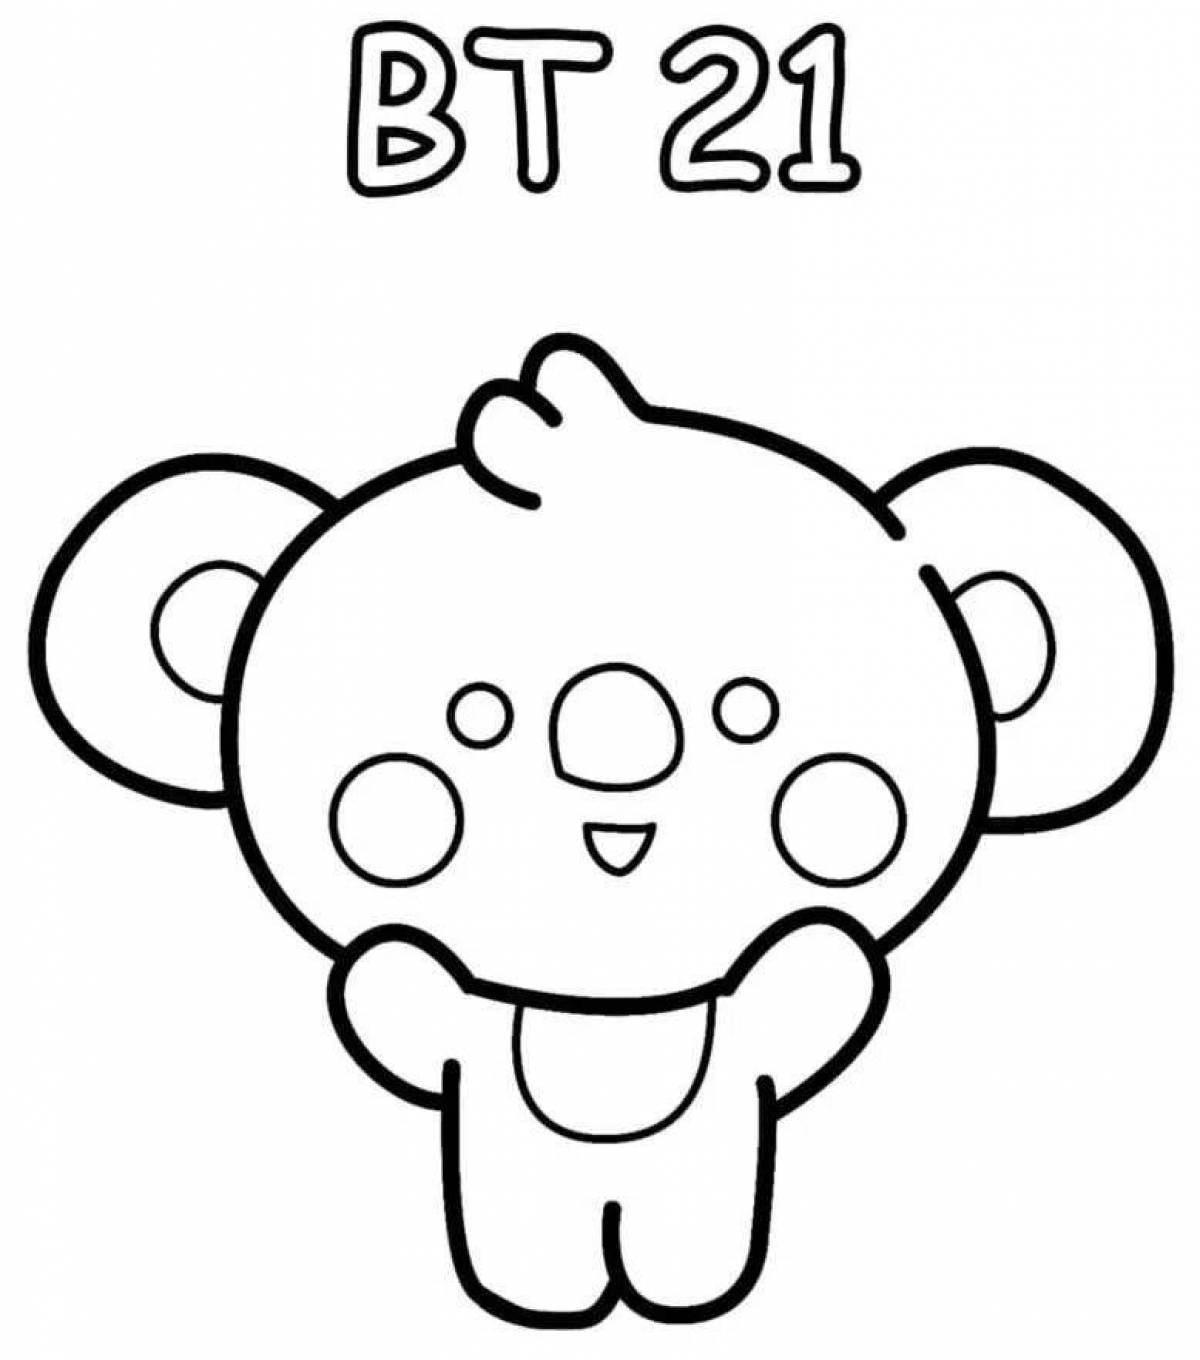 Bright coloring bt 21 coloring page